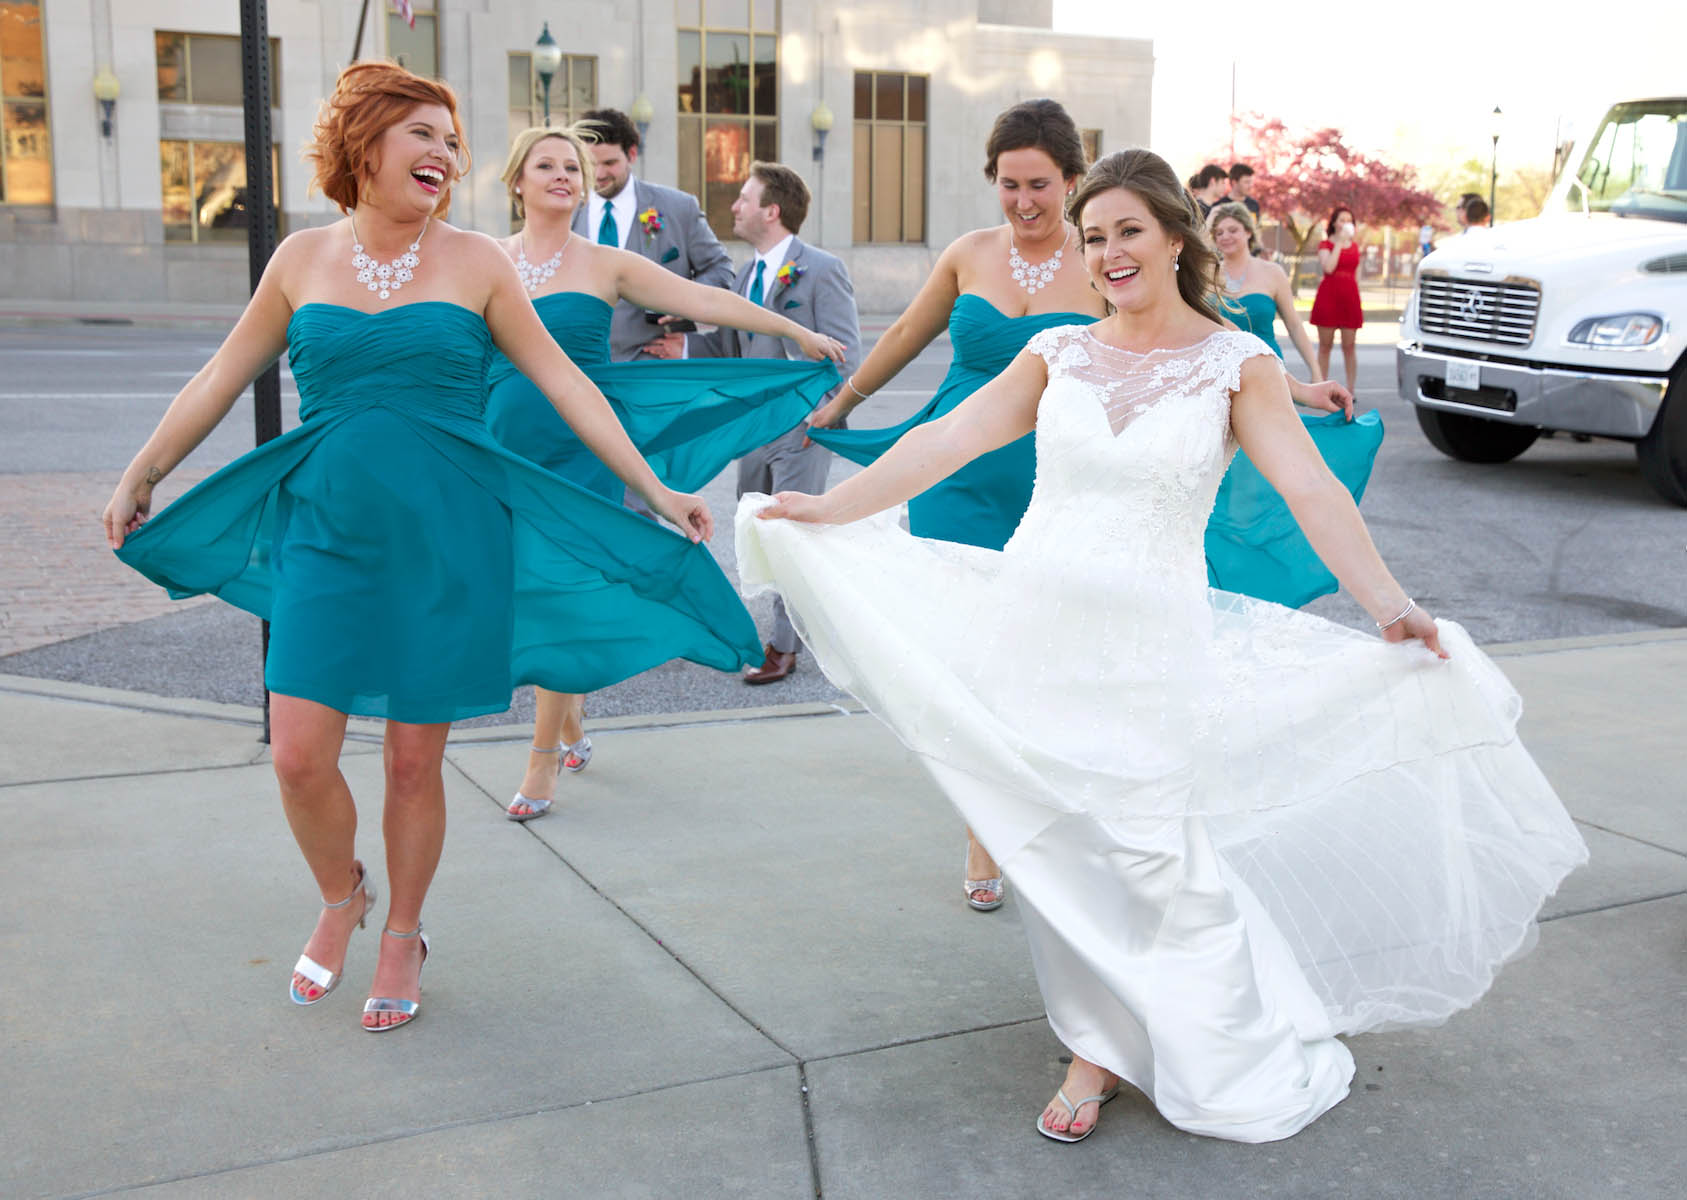 Alissa and her bridesmaids have fun with their flowy dresses. Wedding pictures by Tiffany & Steve of Warmowski Photography.